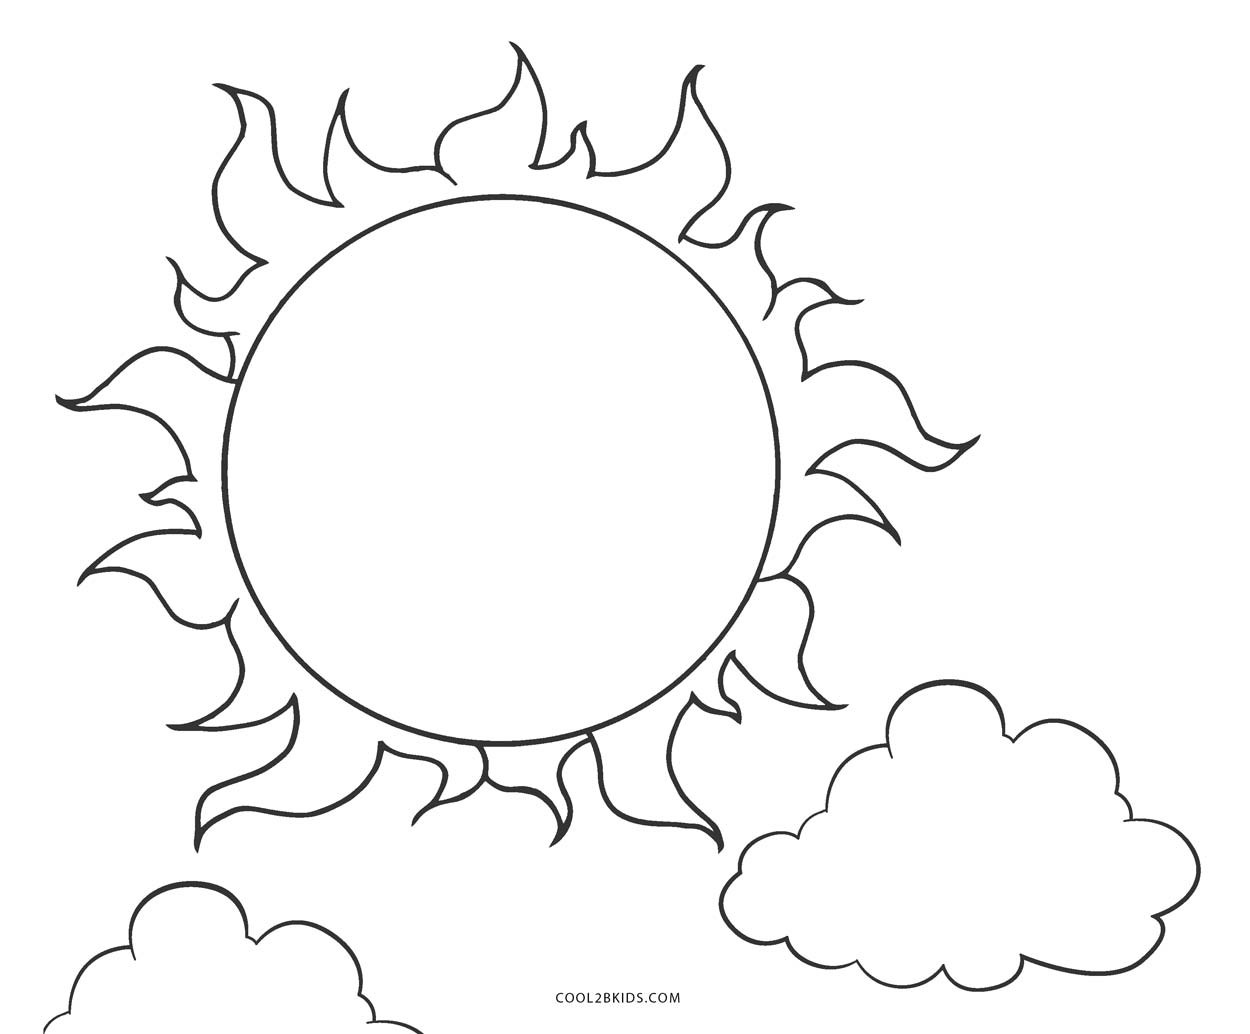 Free Printable Sun Coloring Pages
 Free Printable Sun Coloring Pages For Kids